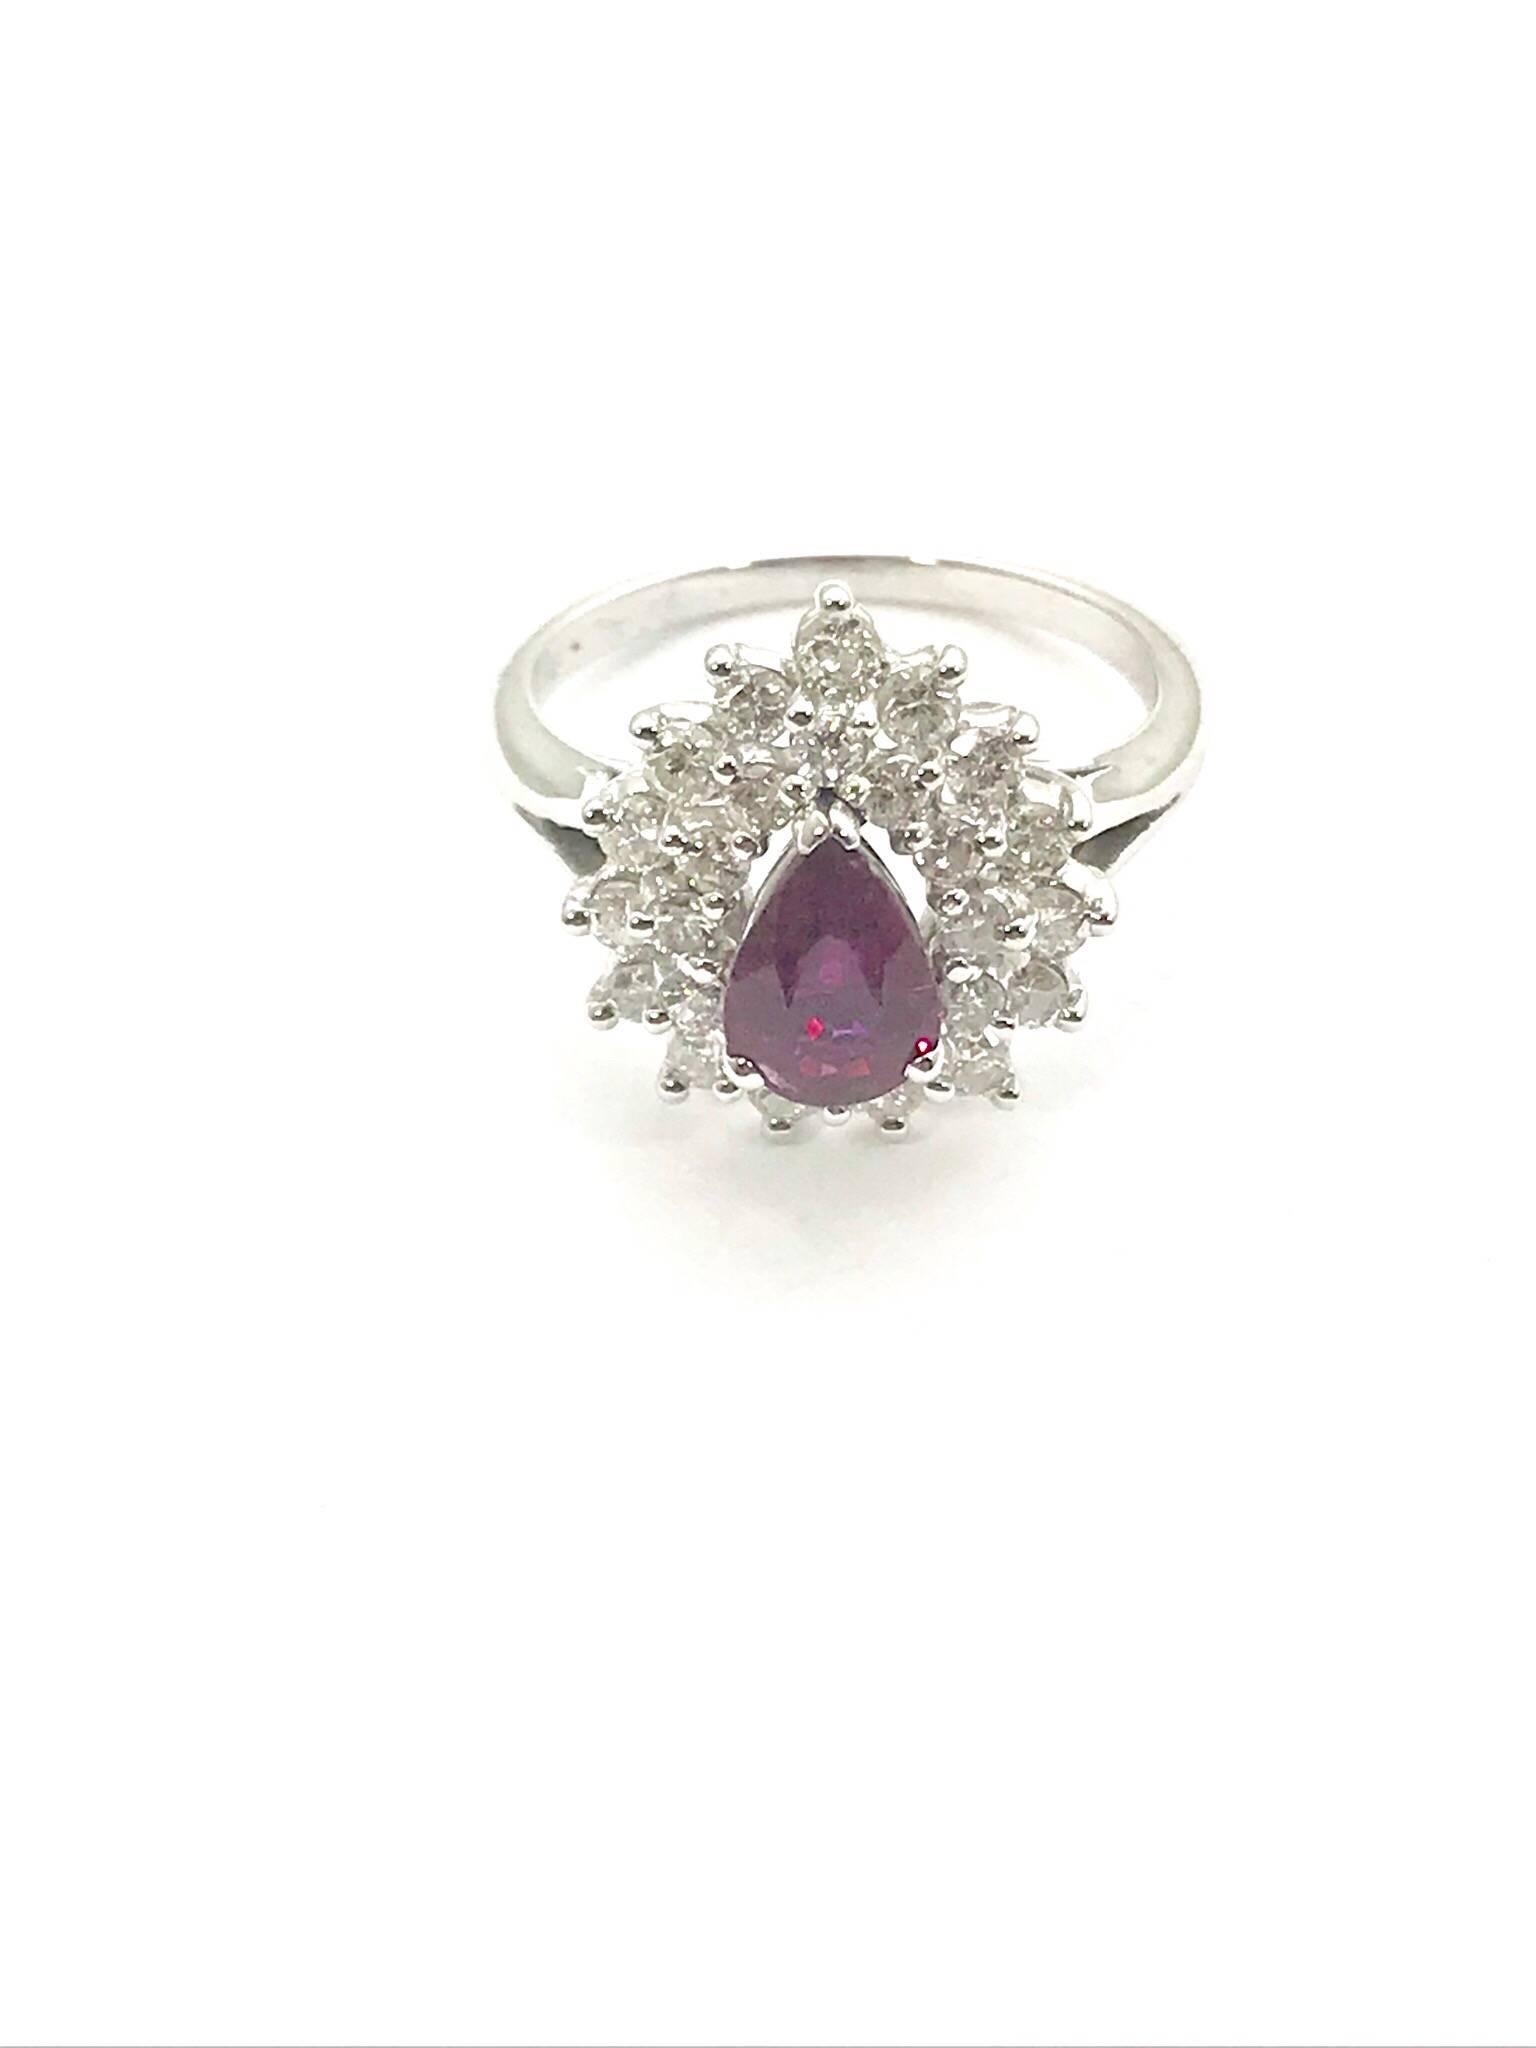 A pear shape natural ruby and round brilliant diamond 14 karat white gold ring.  The ruby is 0.76 carats, set with three prongs, surrounded by a double row of tiered round diamonds.  There are 27 round diamonds with a total weight of 0.75 carats,